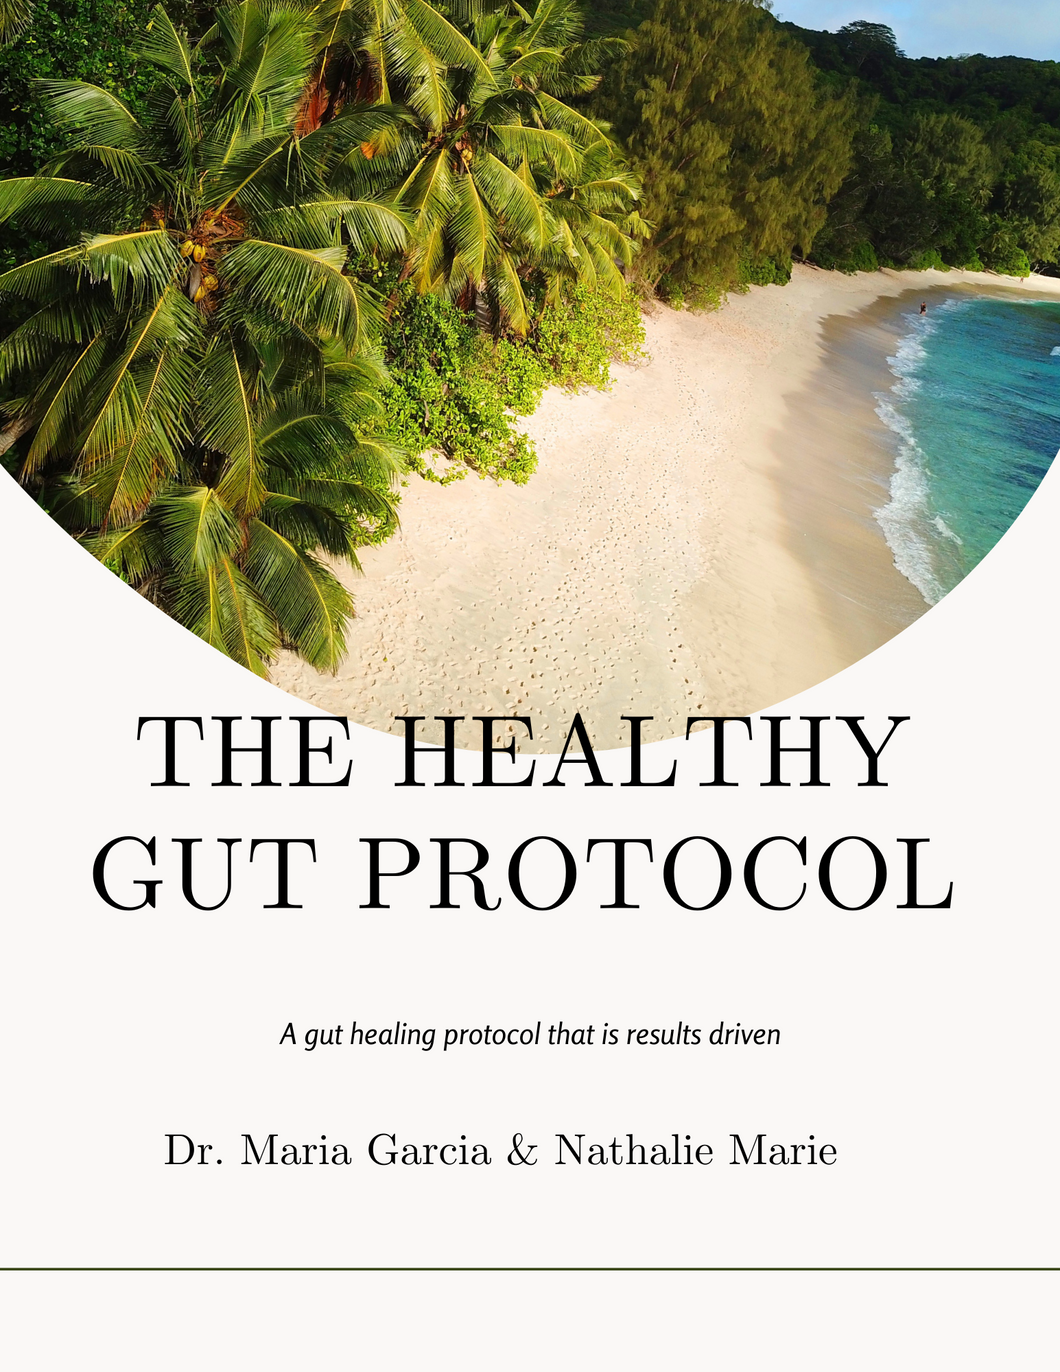 The Healthy Gut Protcol